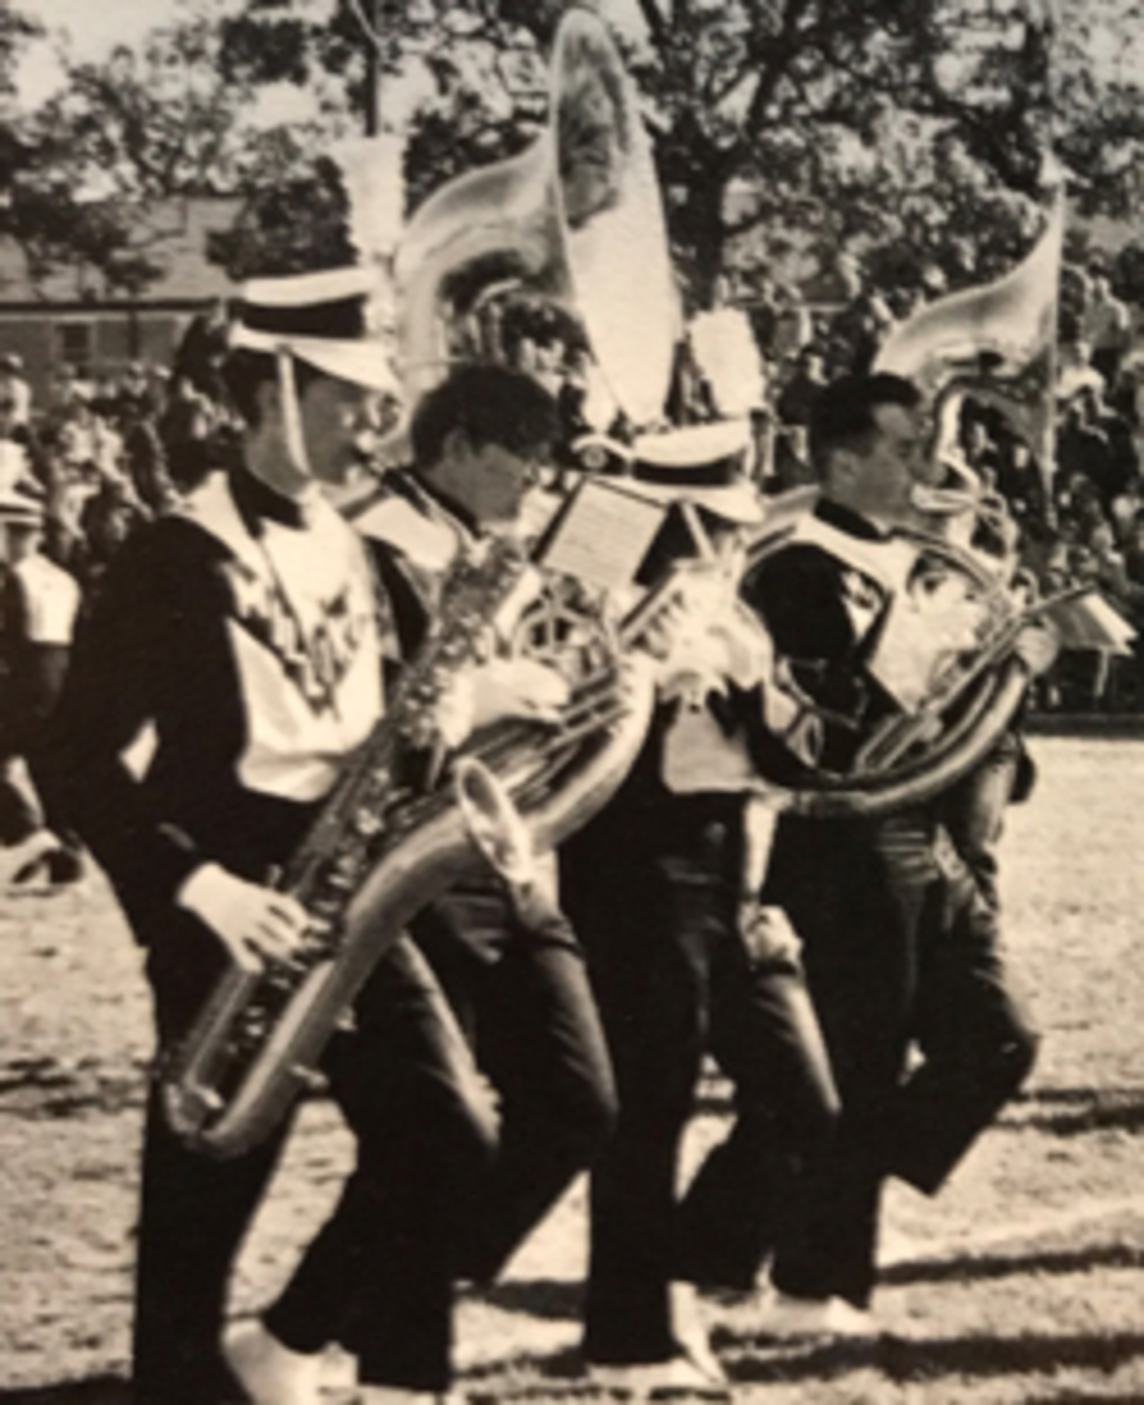 1967 Homecoming game halftime show with the Millikin Marching Band.